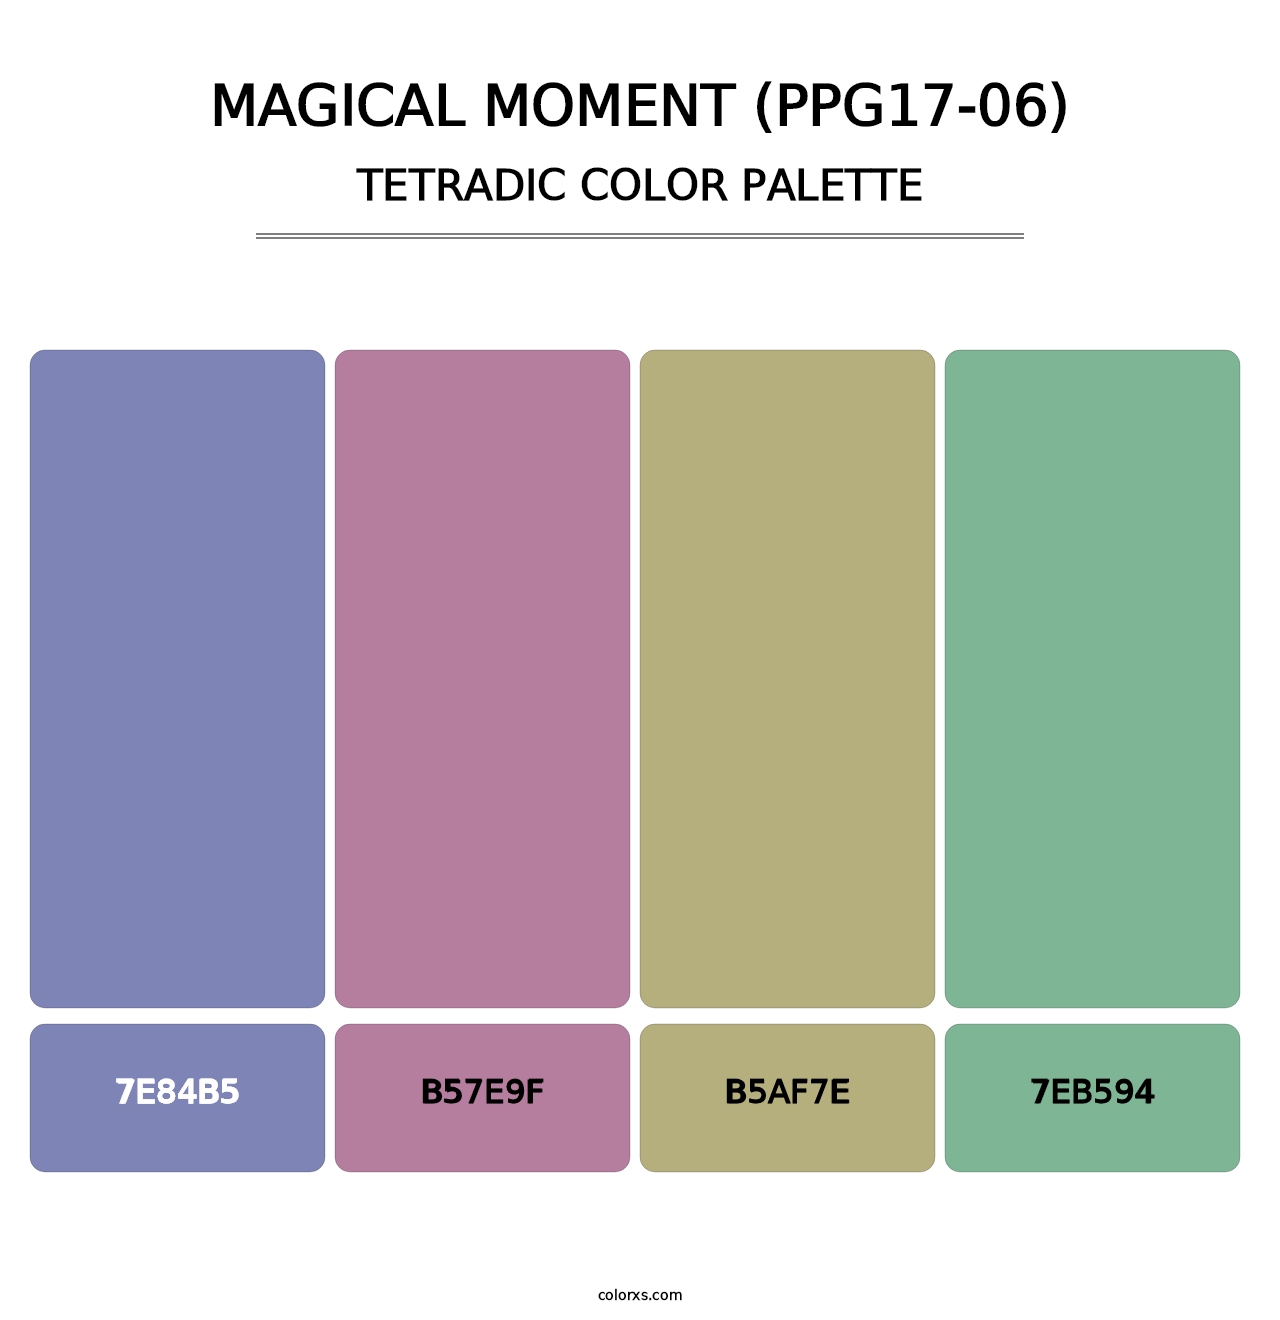 Magical Moment (PPG17-06) - Tetradic Color Palette